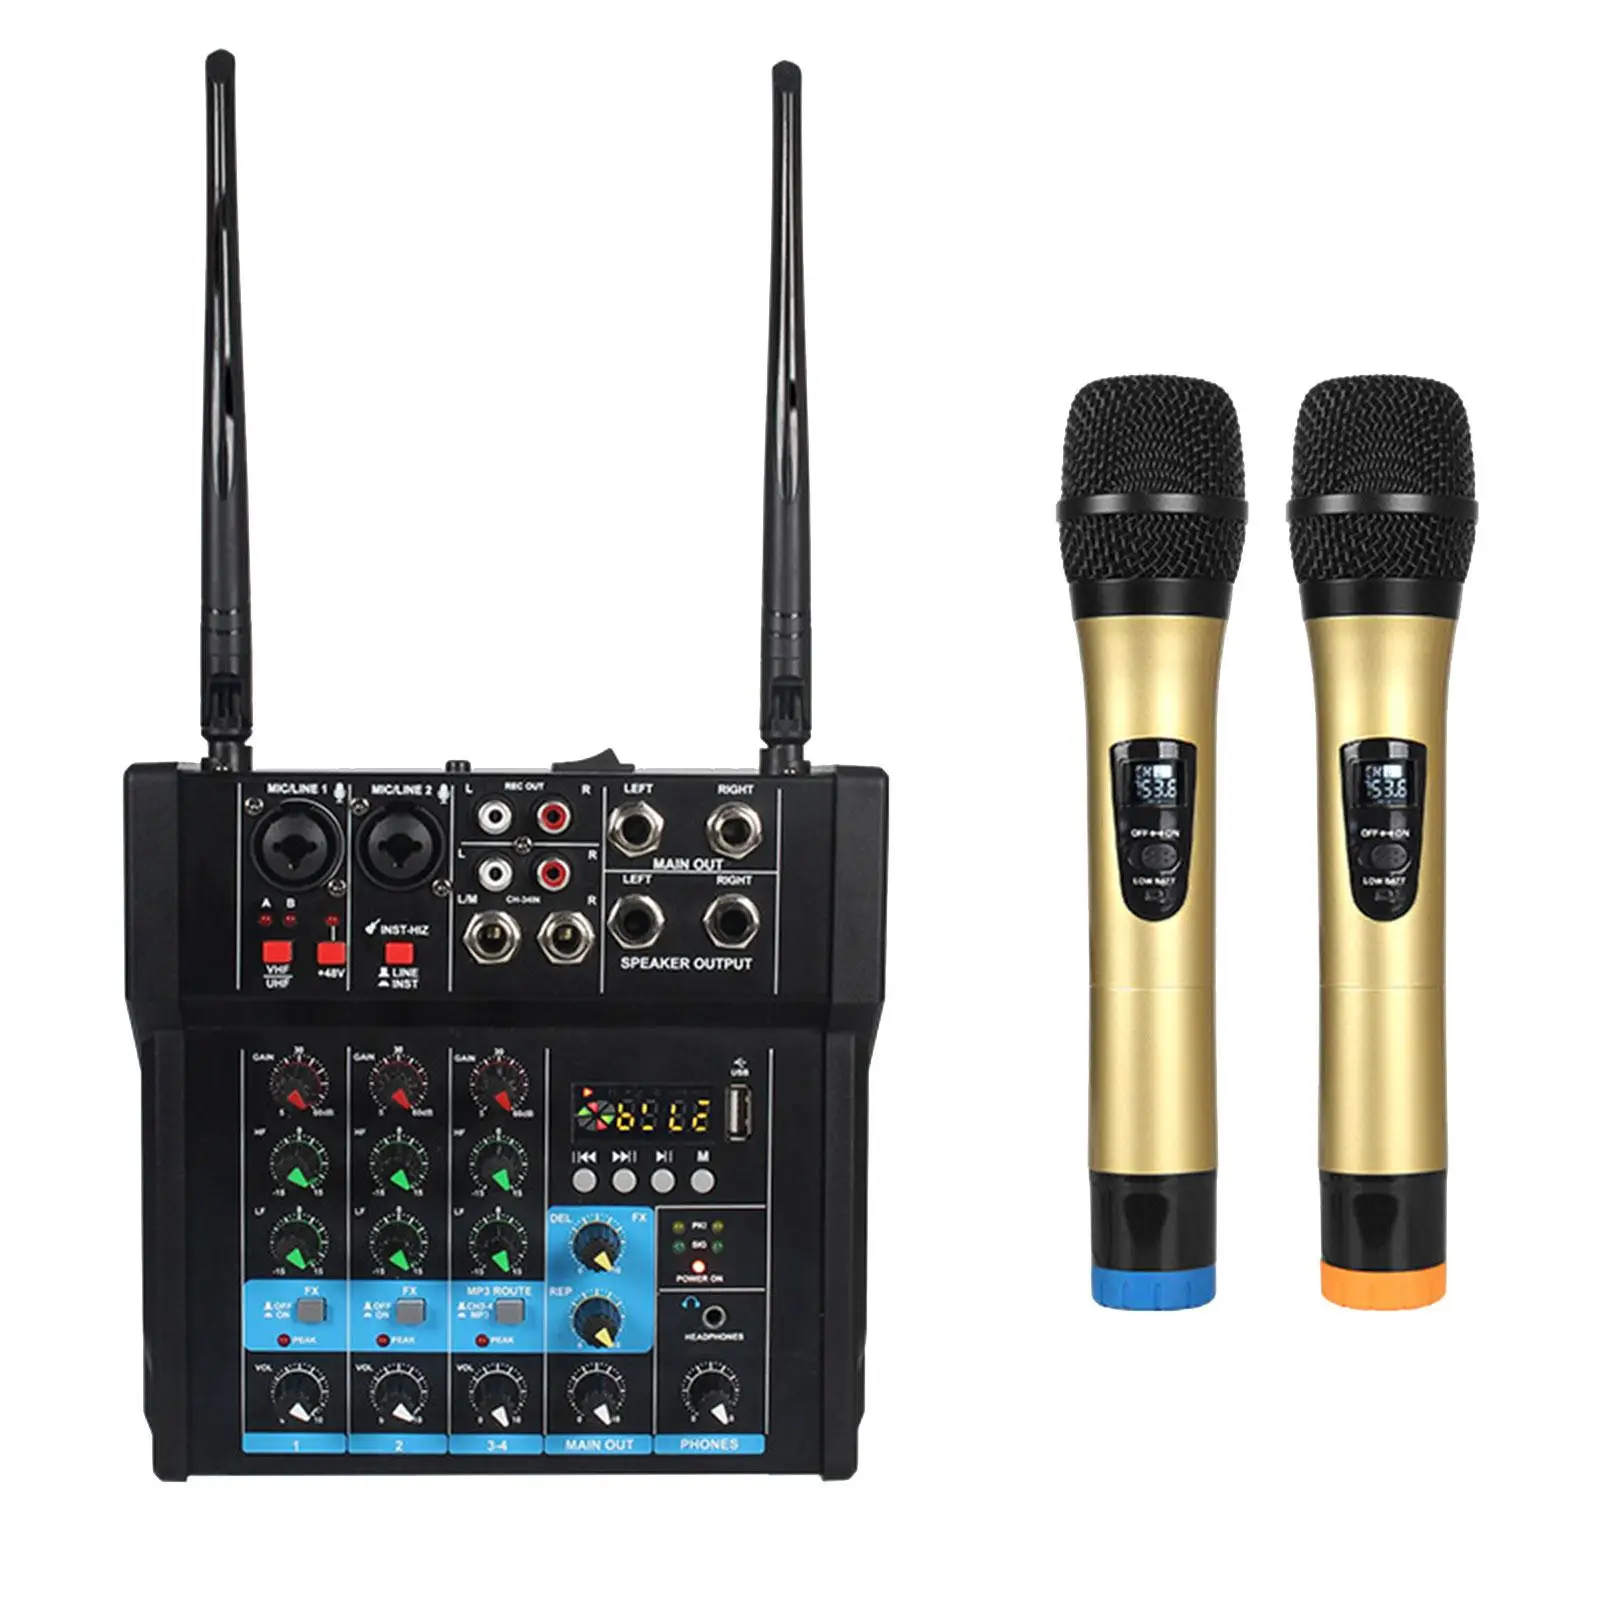 Audio Mixer with Dual Wireless Microphones USB MP3 Bluetooth DJ Mixer Sound Mixer for PC Recording Party Karaoke Live Streaming